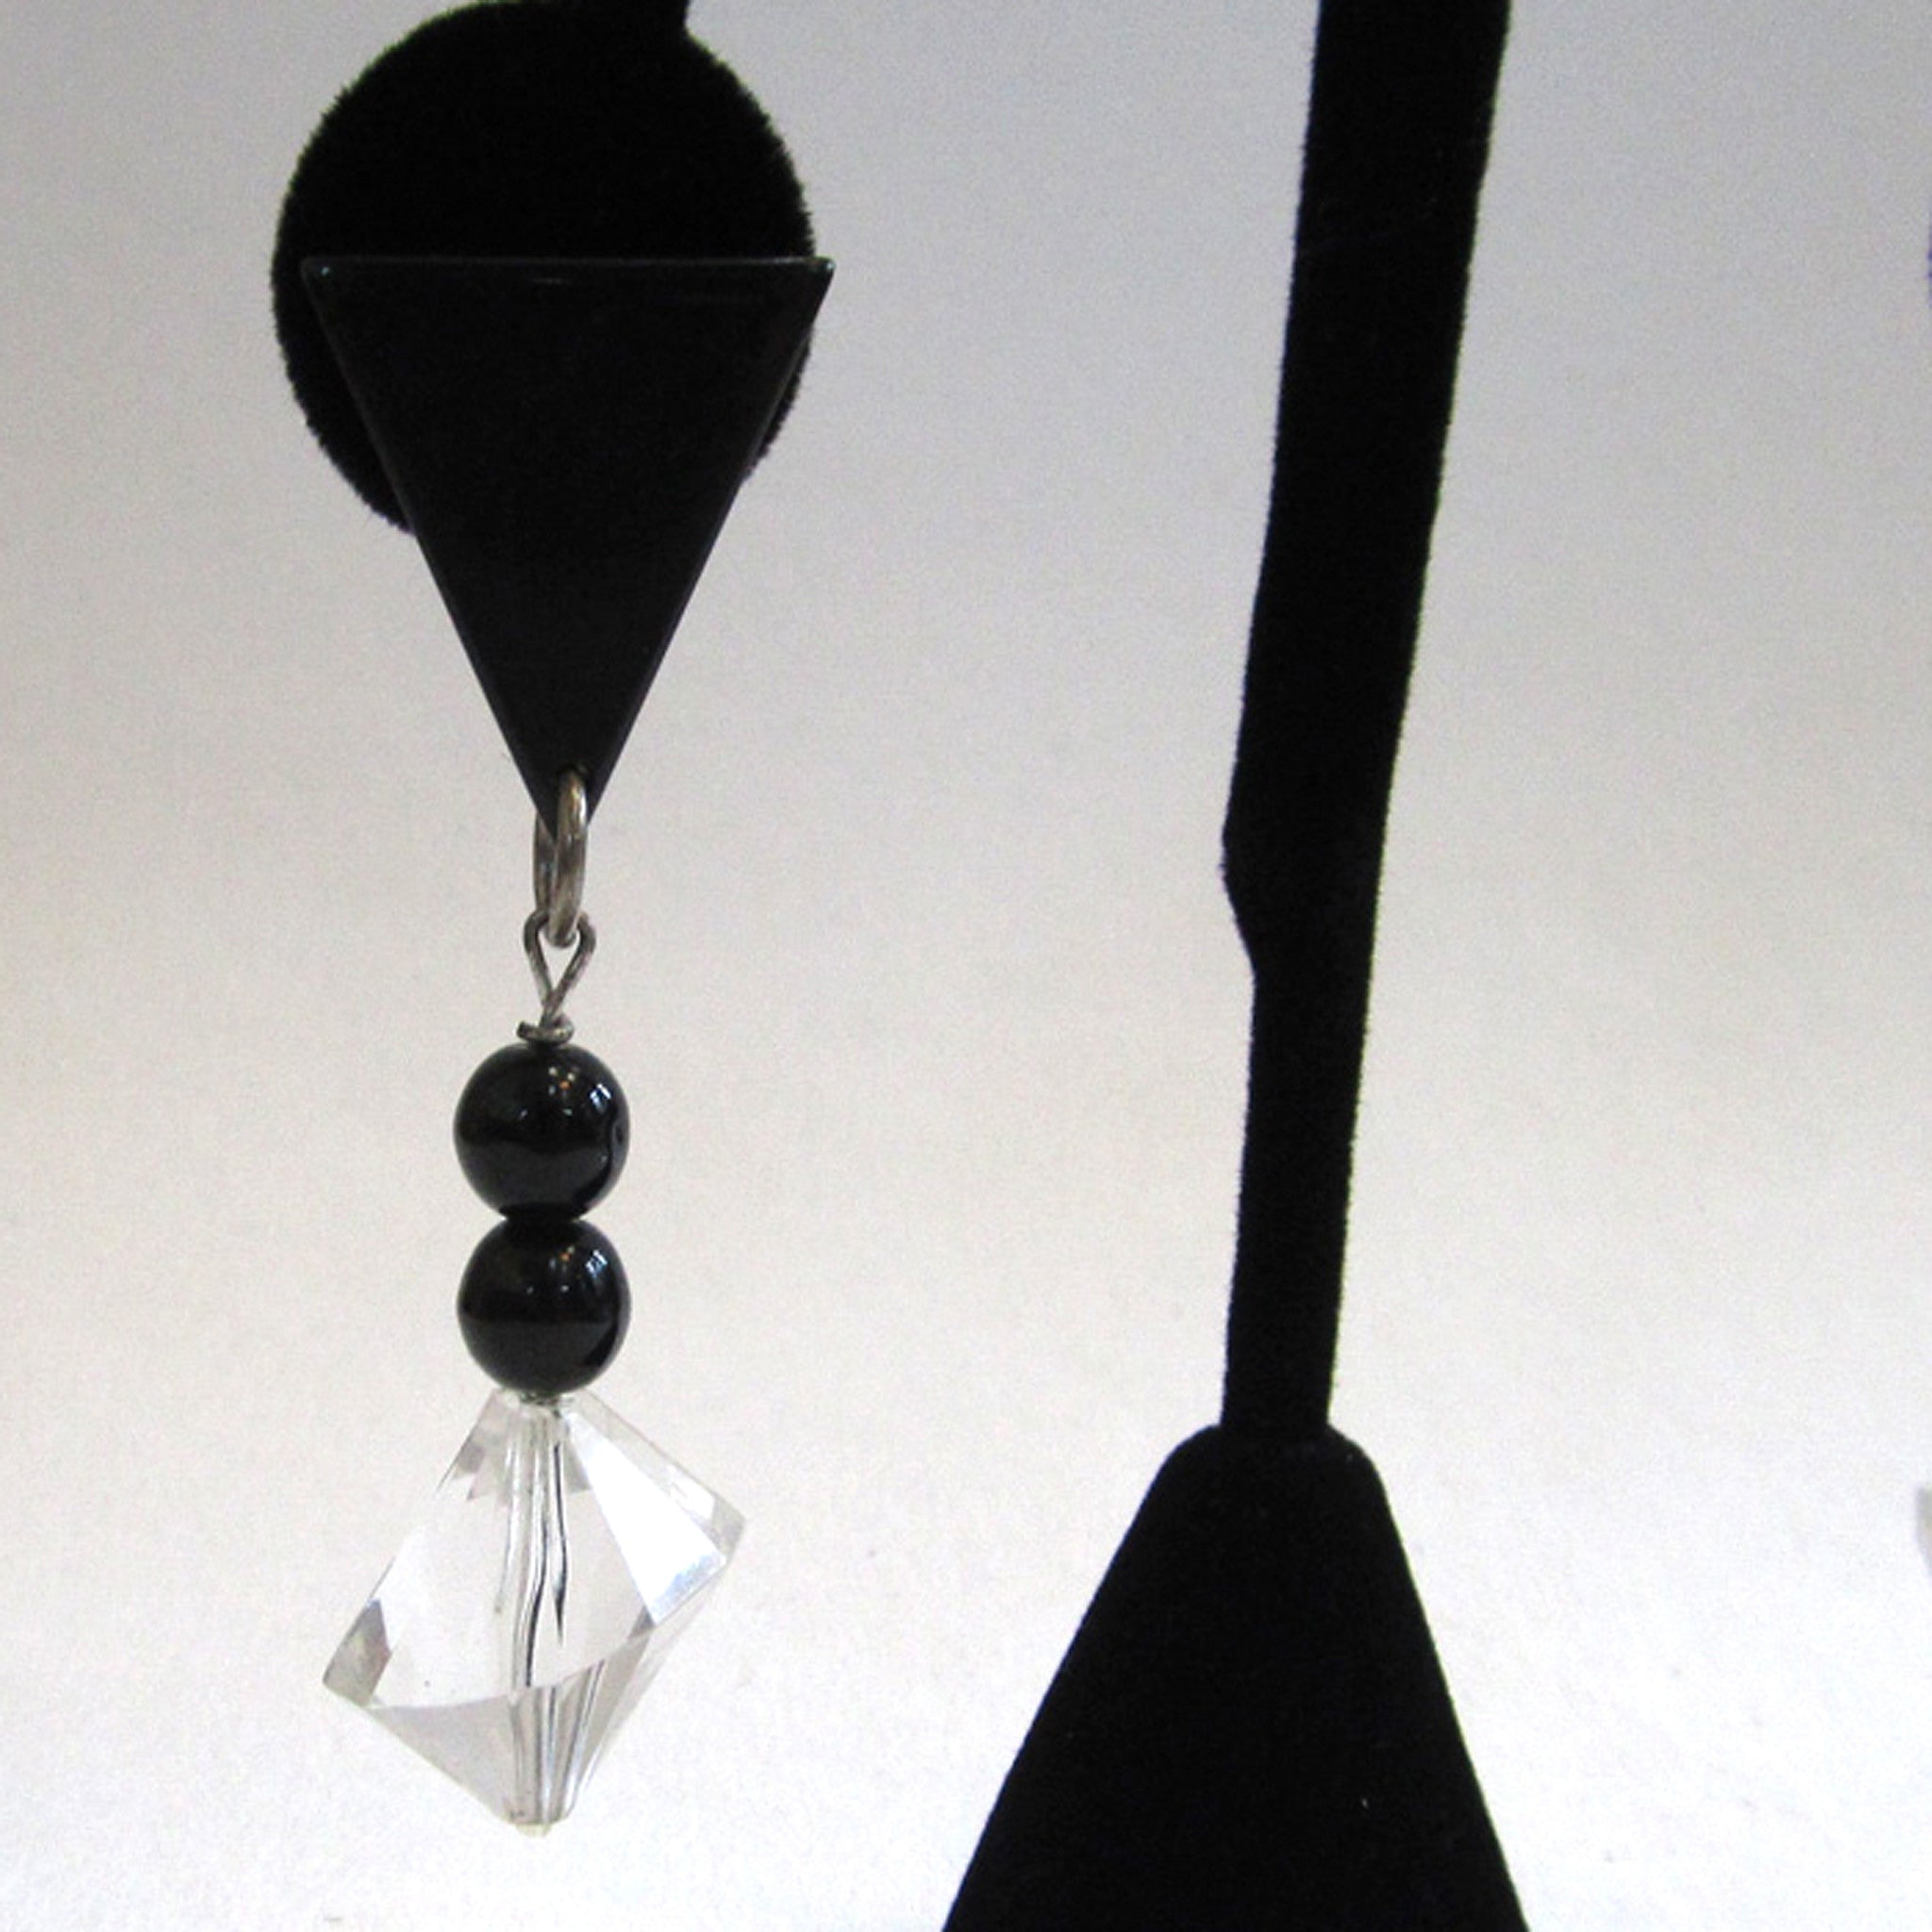 Black and Clear Lucite Architectural Drop Pierced Earrings - D & L  Vintage 